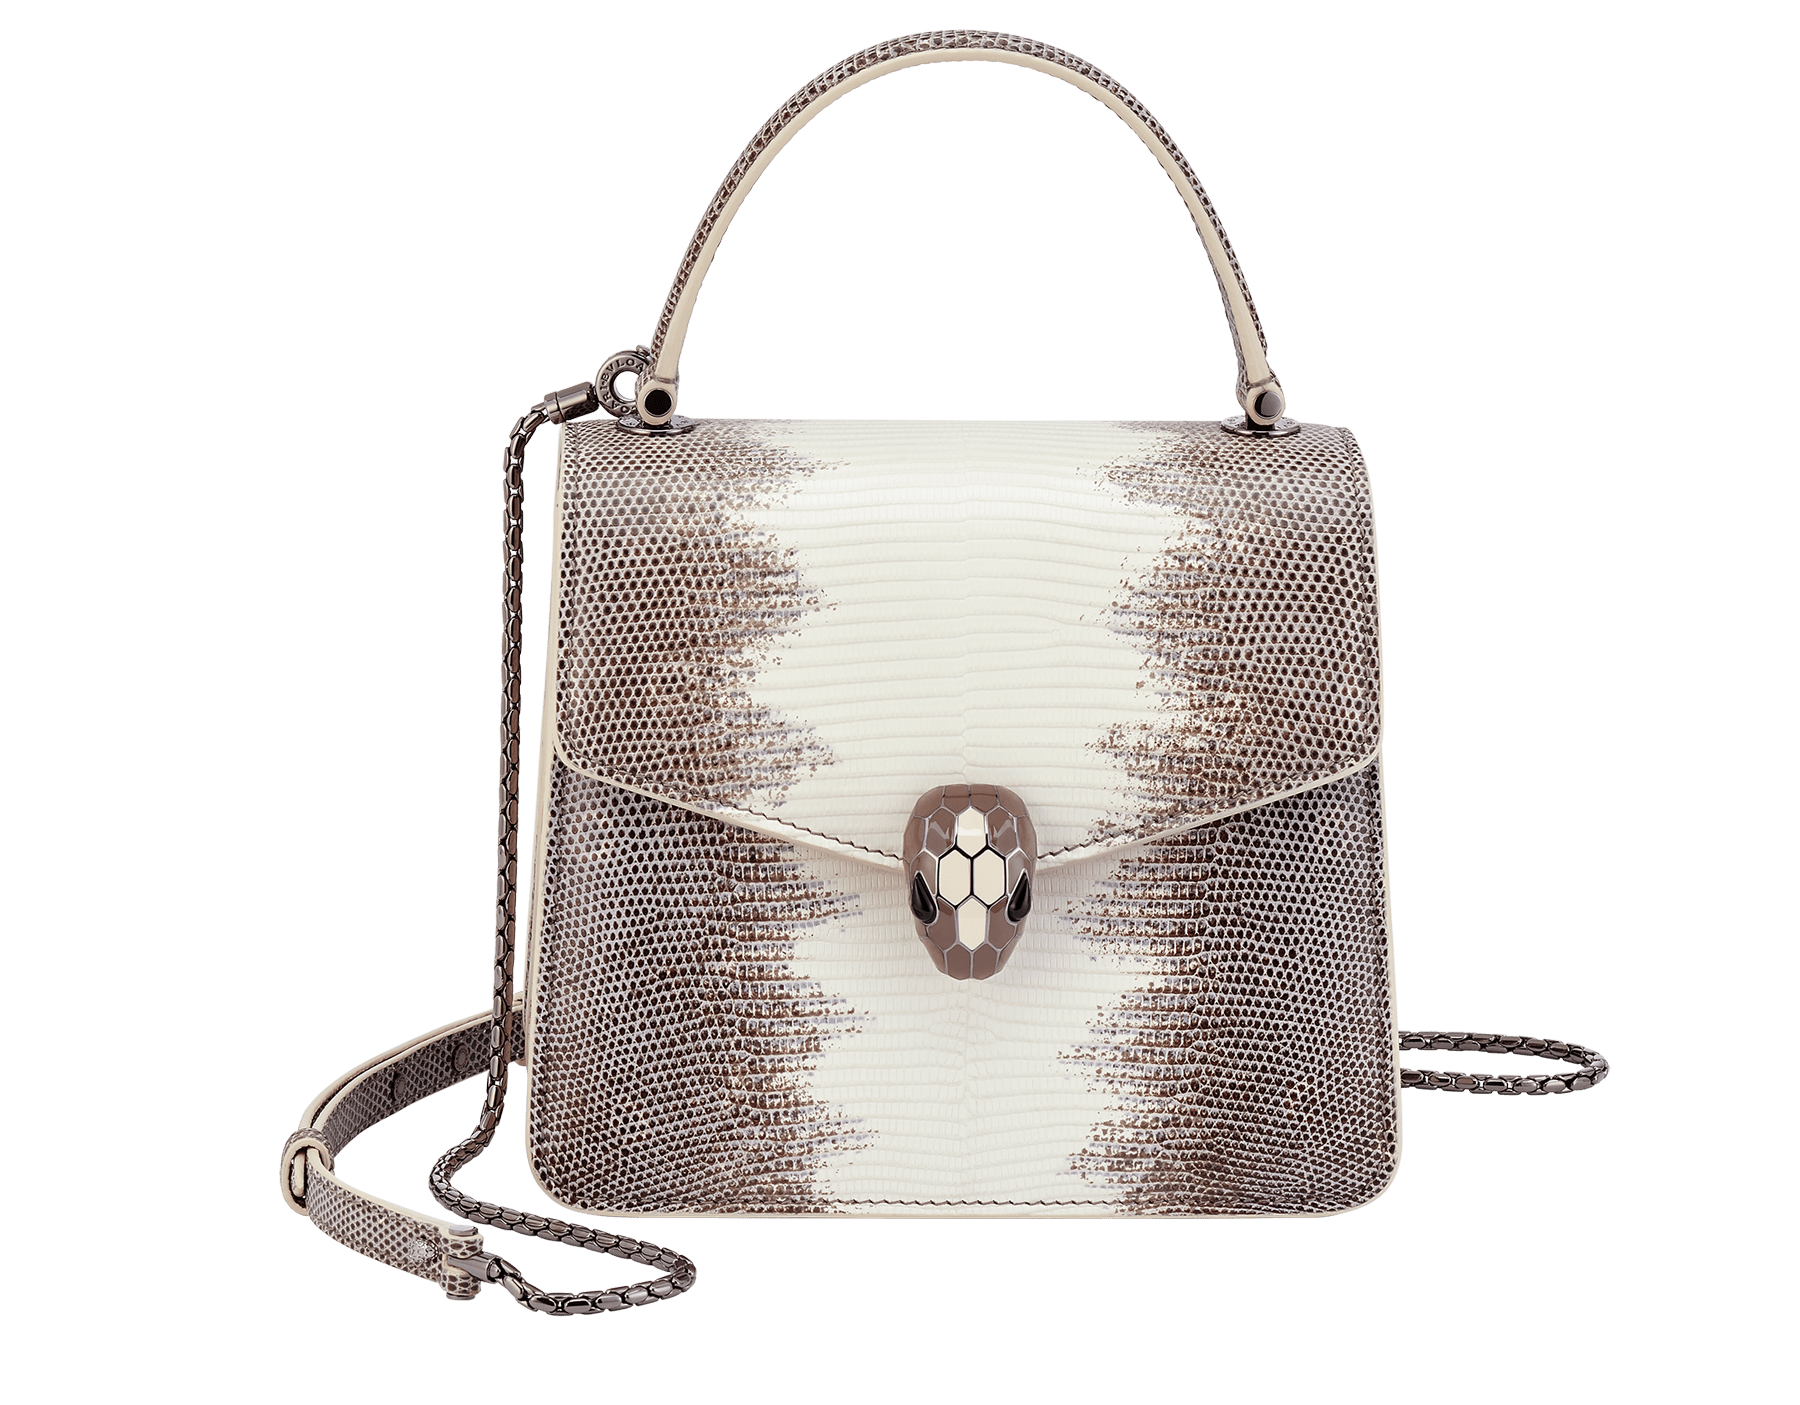 Serpenti Forever small top handle bag in white agate shiny lizard skin with beige and grey shades, and with caramel topaz beige nappa leather lining. Captivating snakehead closure in dark ruthenium-plated brass embellished with brown-green and ivory opal enamel scales and black onyx eyes. 291484 image 1